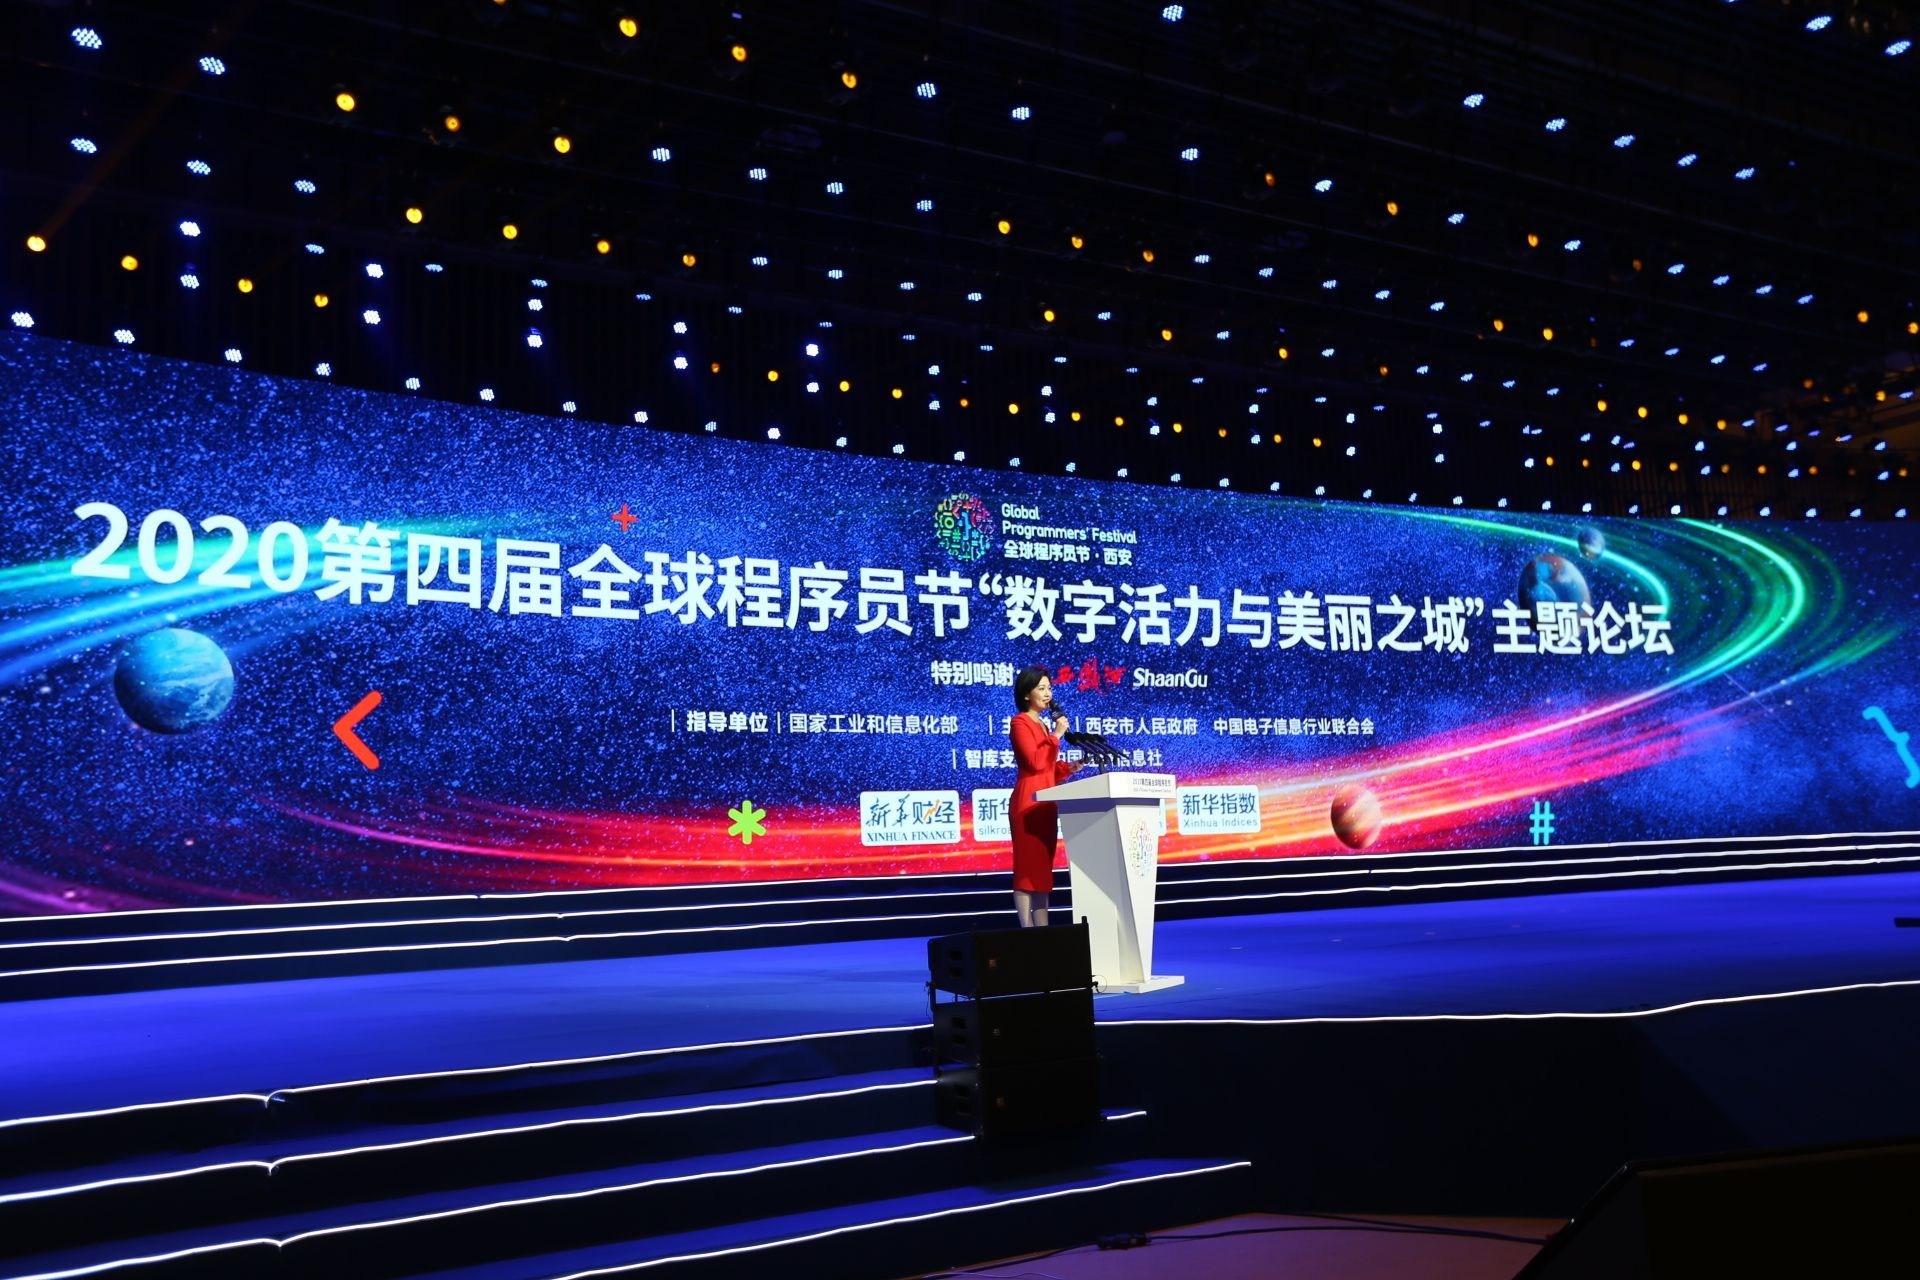 Xinhua Silk Road: Digital Vitality and Beautiful City Forum Held in NW. China's Xi'an on Sunday